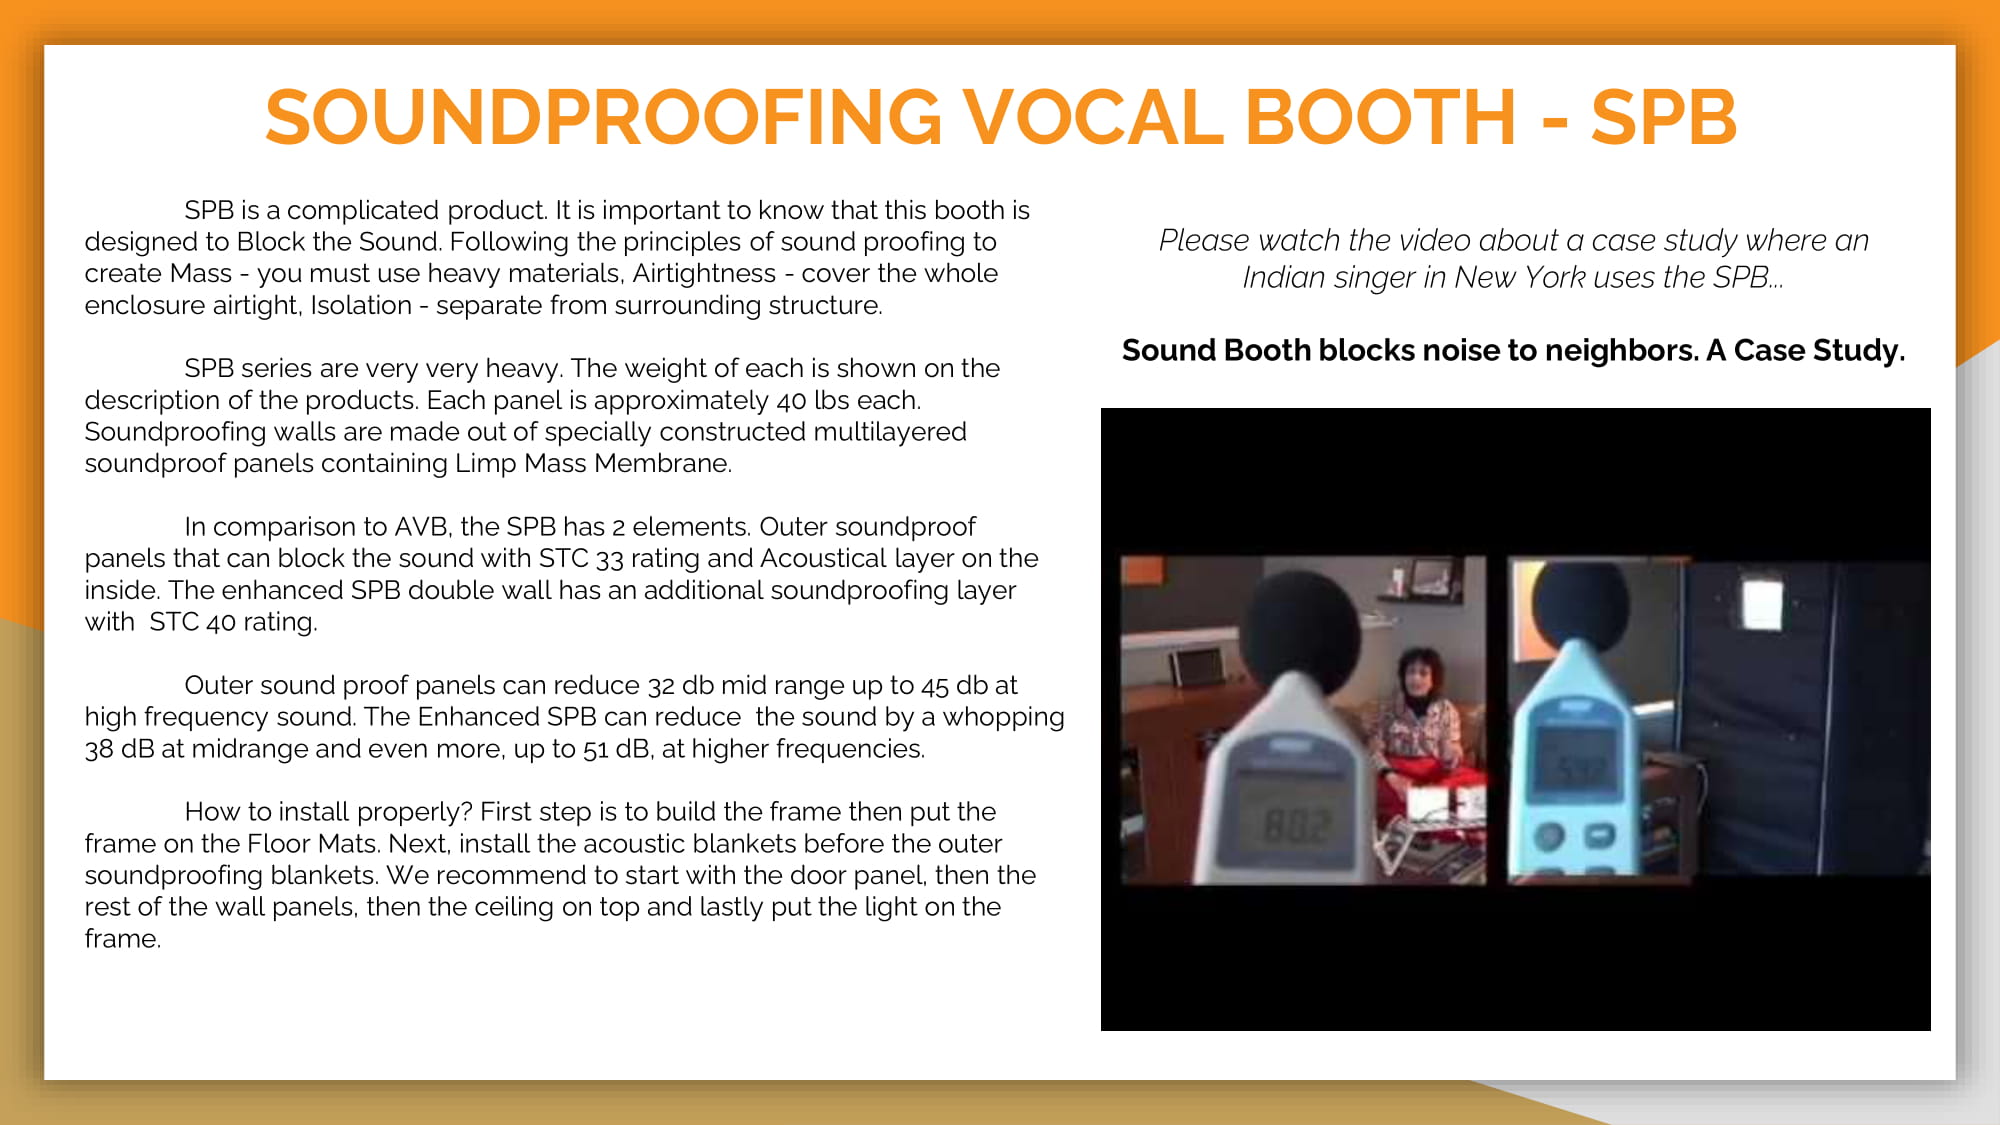 SOUNDPROOFING VOCAL BOOTH -SPB